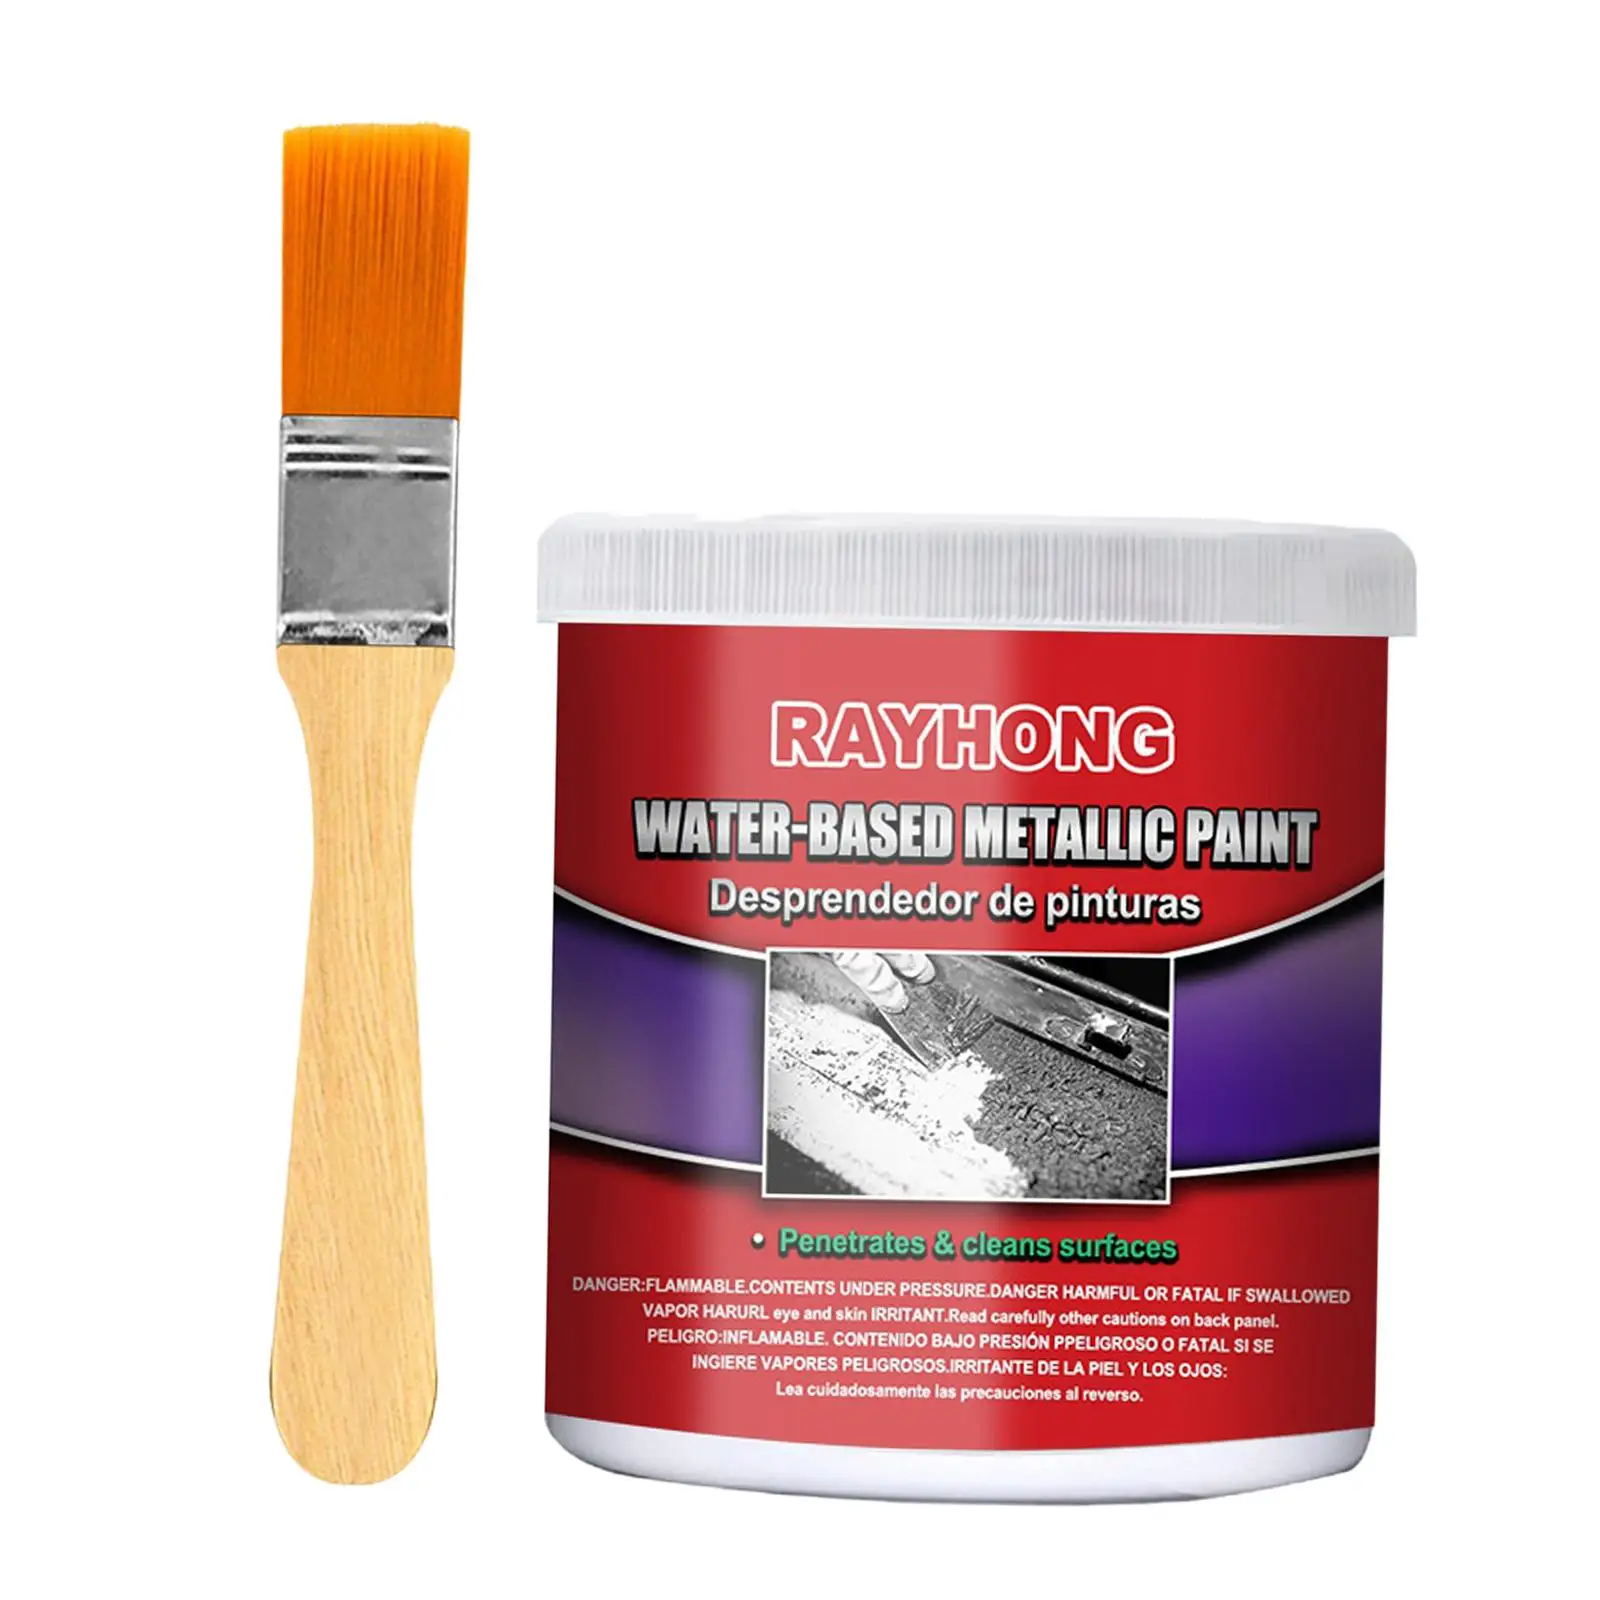 Rust paint Chassis Derusting Multifunctional Universal Rust Preventive Coating for Trash Cans Automotive Agricultural Fleet